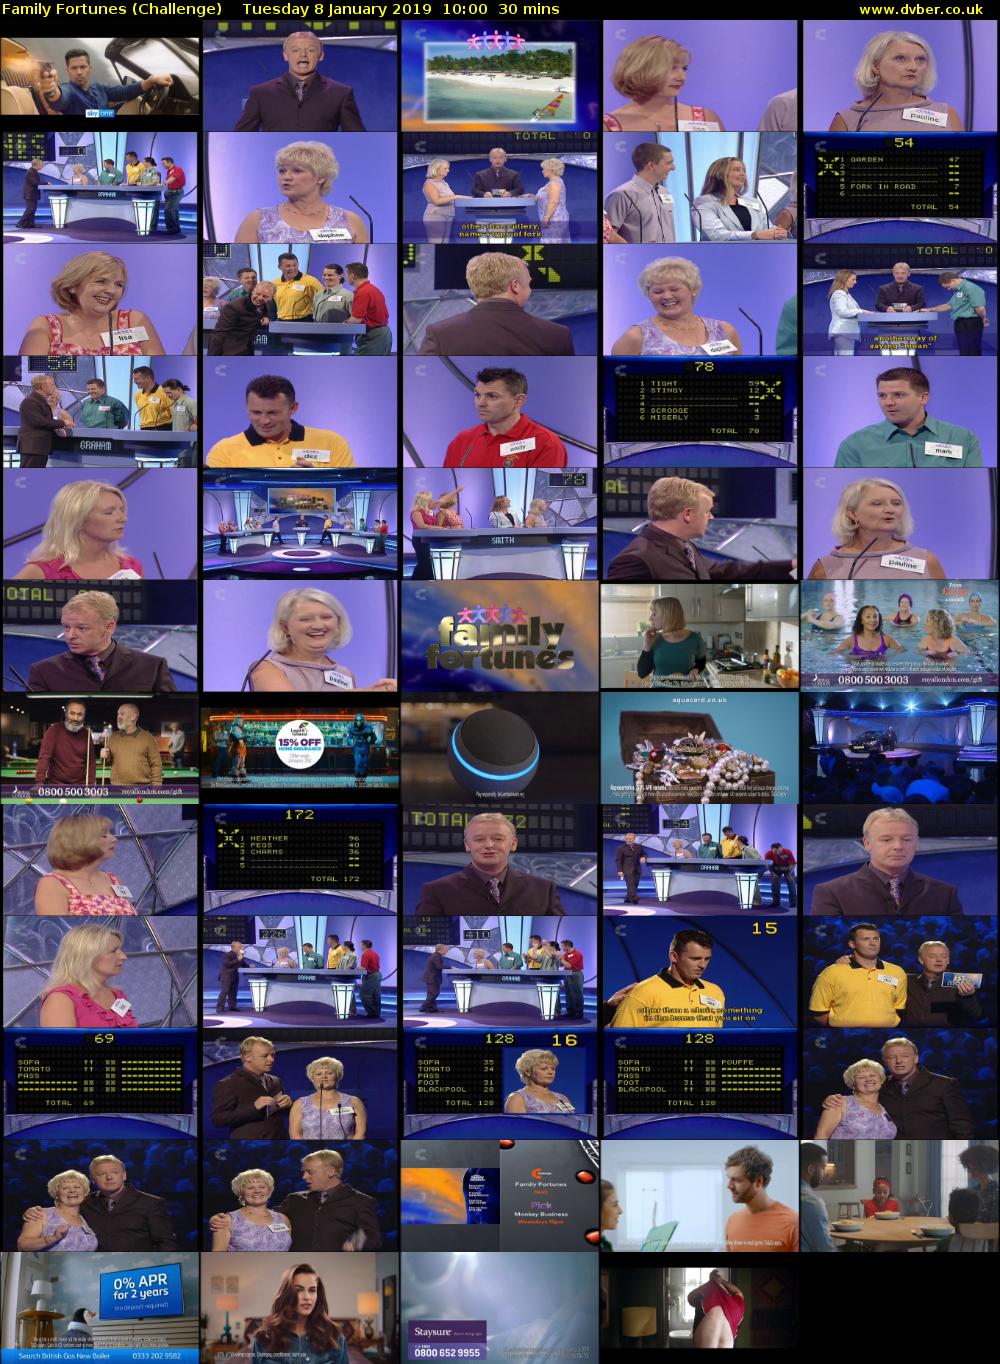 Family Fortunes (Challenge) Tuesday 8 January 2019 10:00 - 10:30